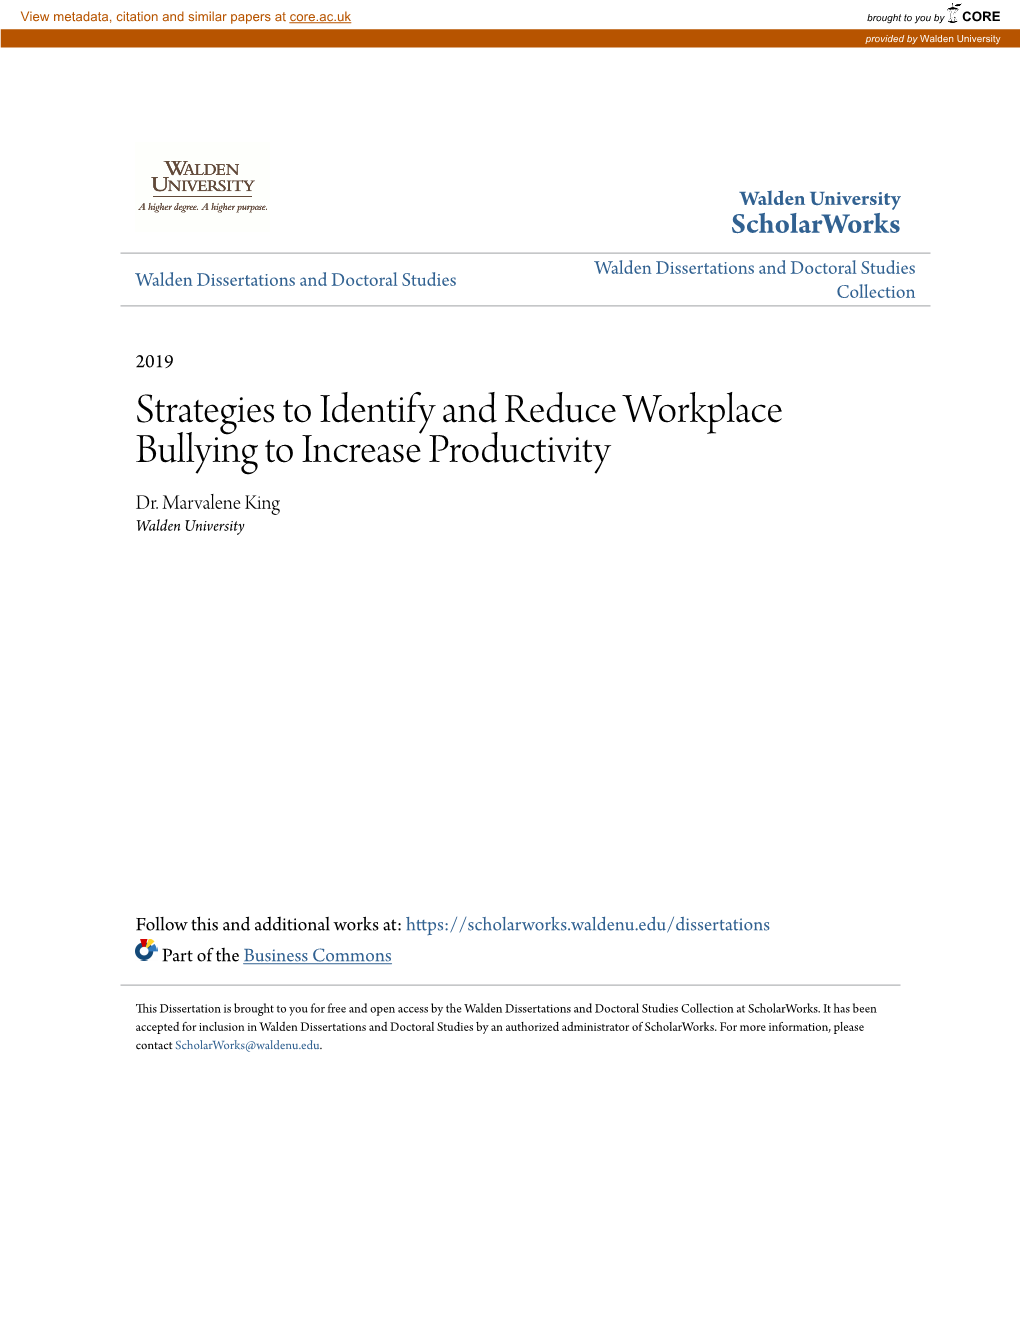 Strategies to Identify and Reduce Workplace Bullying to Increase Productivity Dr